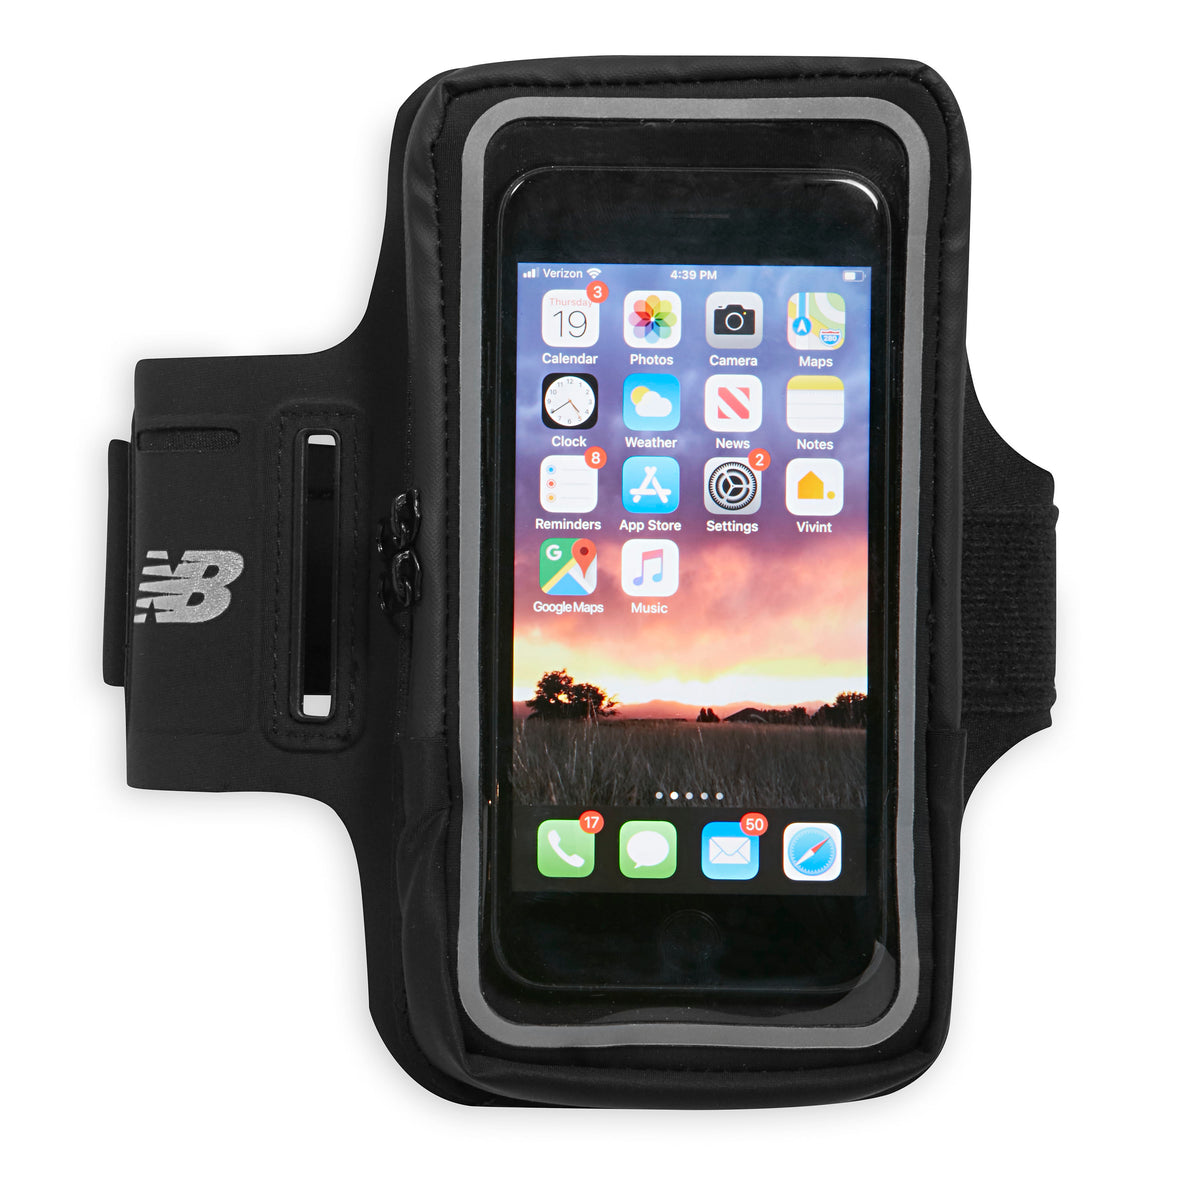 New Balance Smartphone Armband front with phone